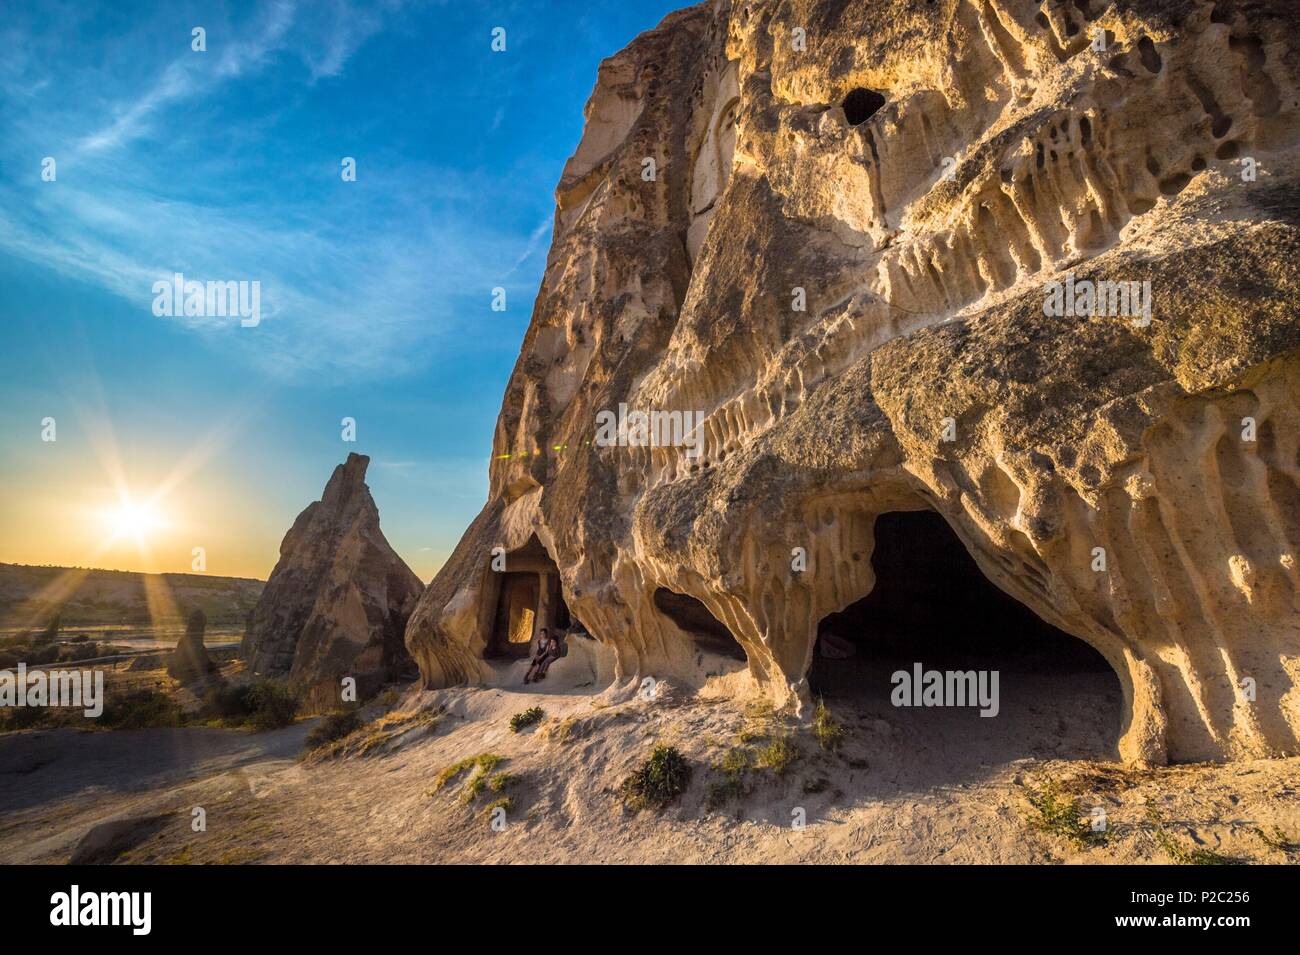 Turkey, Central Anatolia, Nev&#x15f;ehir province, Cappadocia UNESCO World Heritage Site, Kiliçlar, two children discover the Swords Valley, landscape of volcanic tuff hills and vestiges of troglodyte dwellings of the Göreme National Park Stock Photo